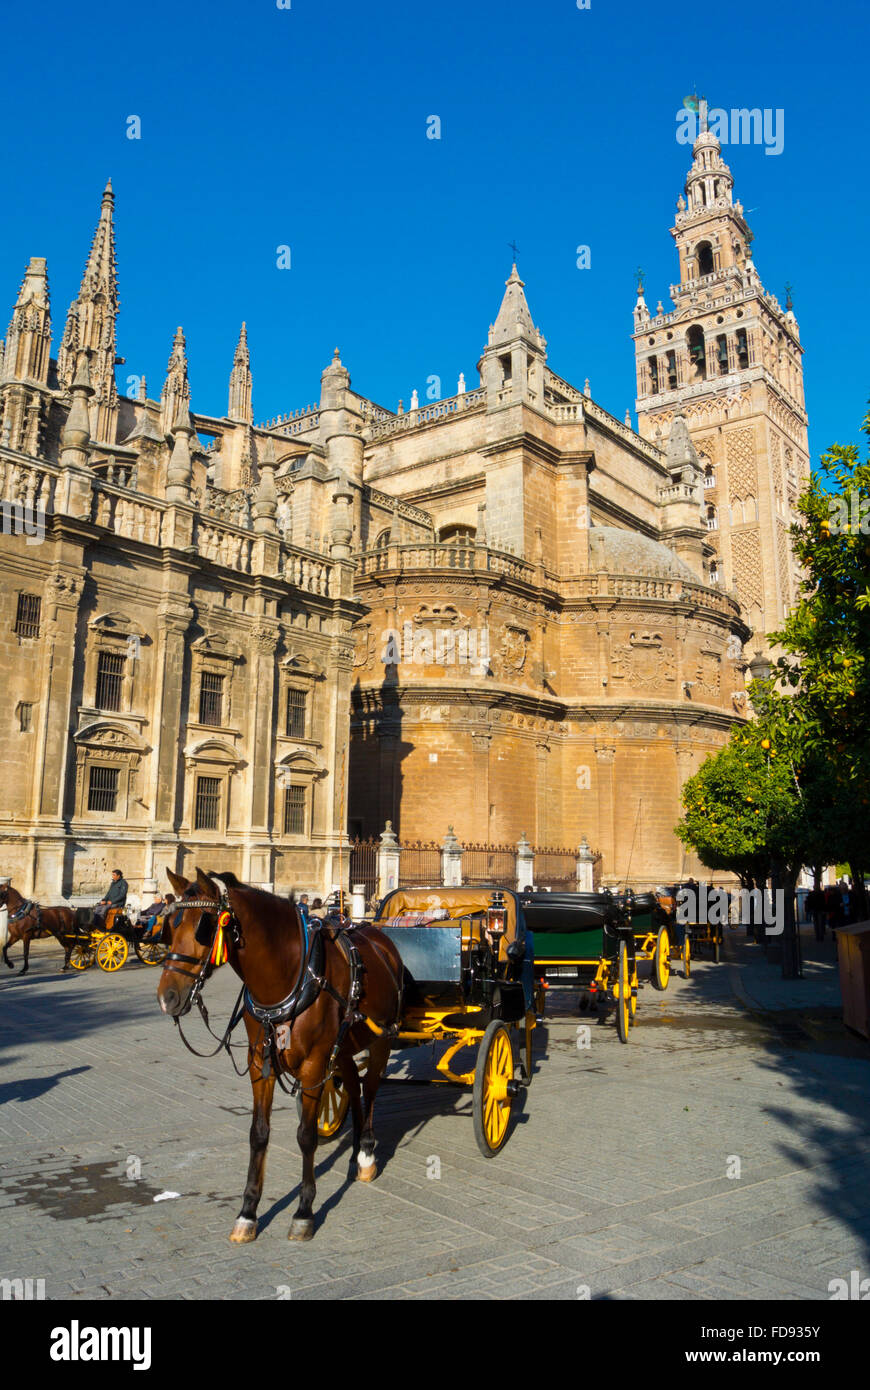 Horse drawn carriages, in front of the Cathedral, Sevilla, Andalucia, Spain Stock Photo